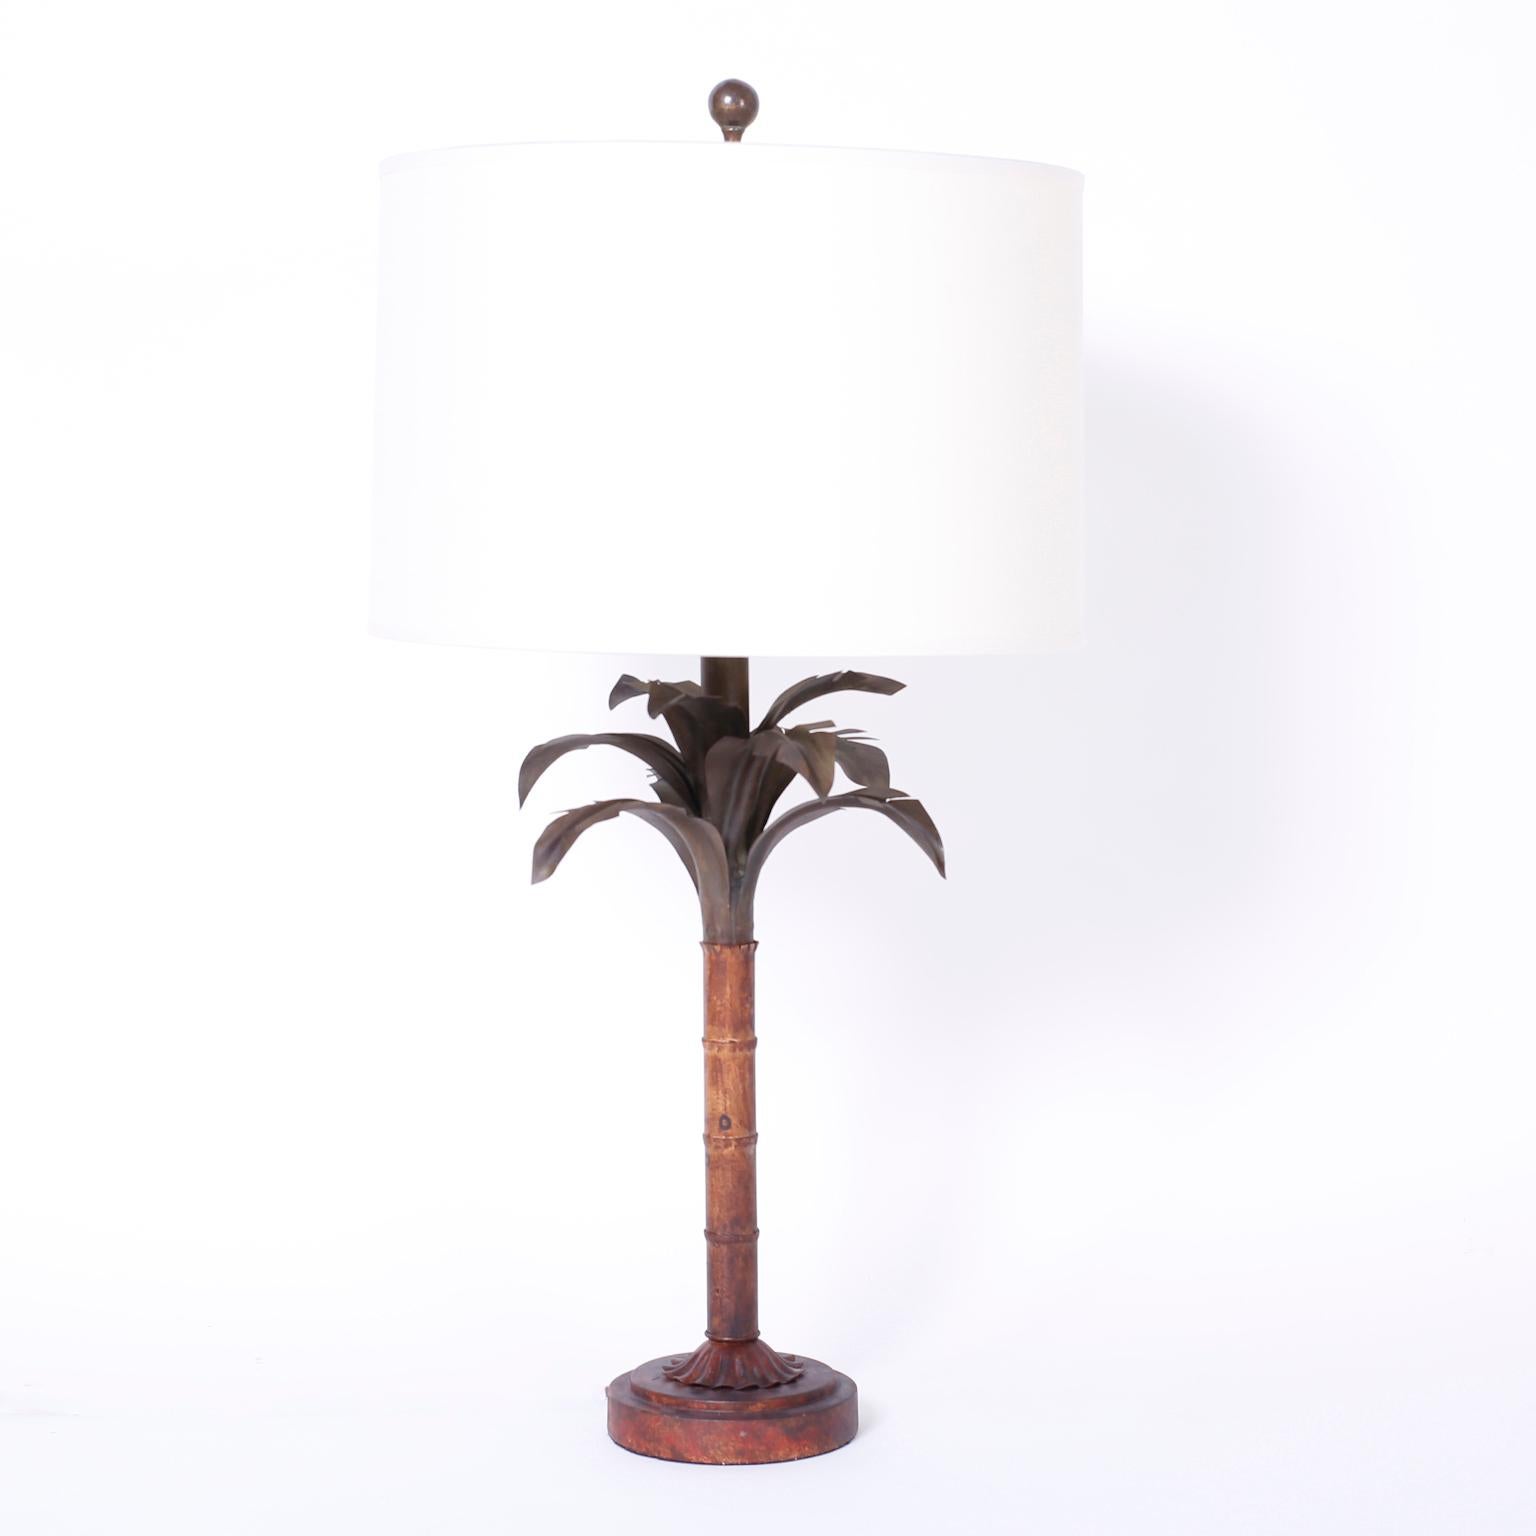 Pair of midcentury tole stylized palm tree table lamps painted in earthy colors and having dynamic decorative appeal.